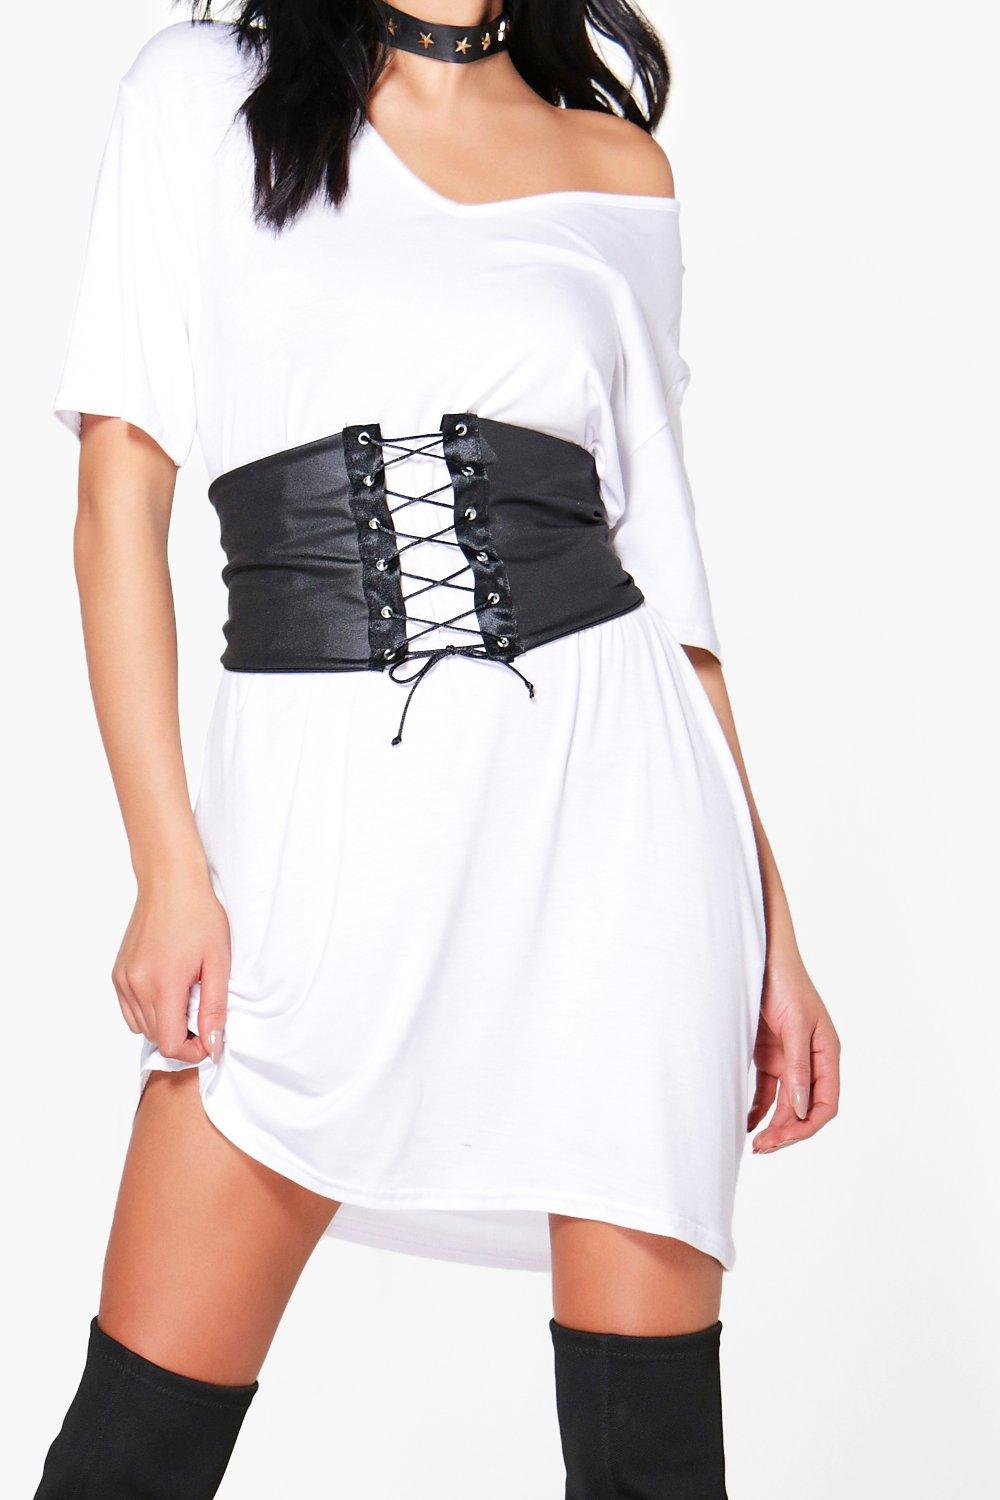 From t shirt dress with corset belt casual